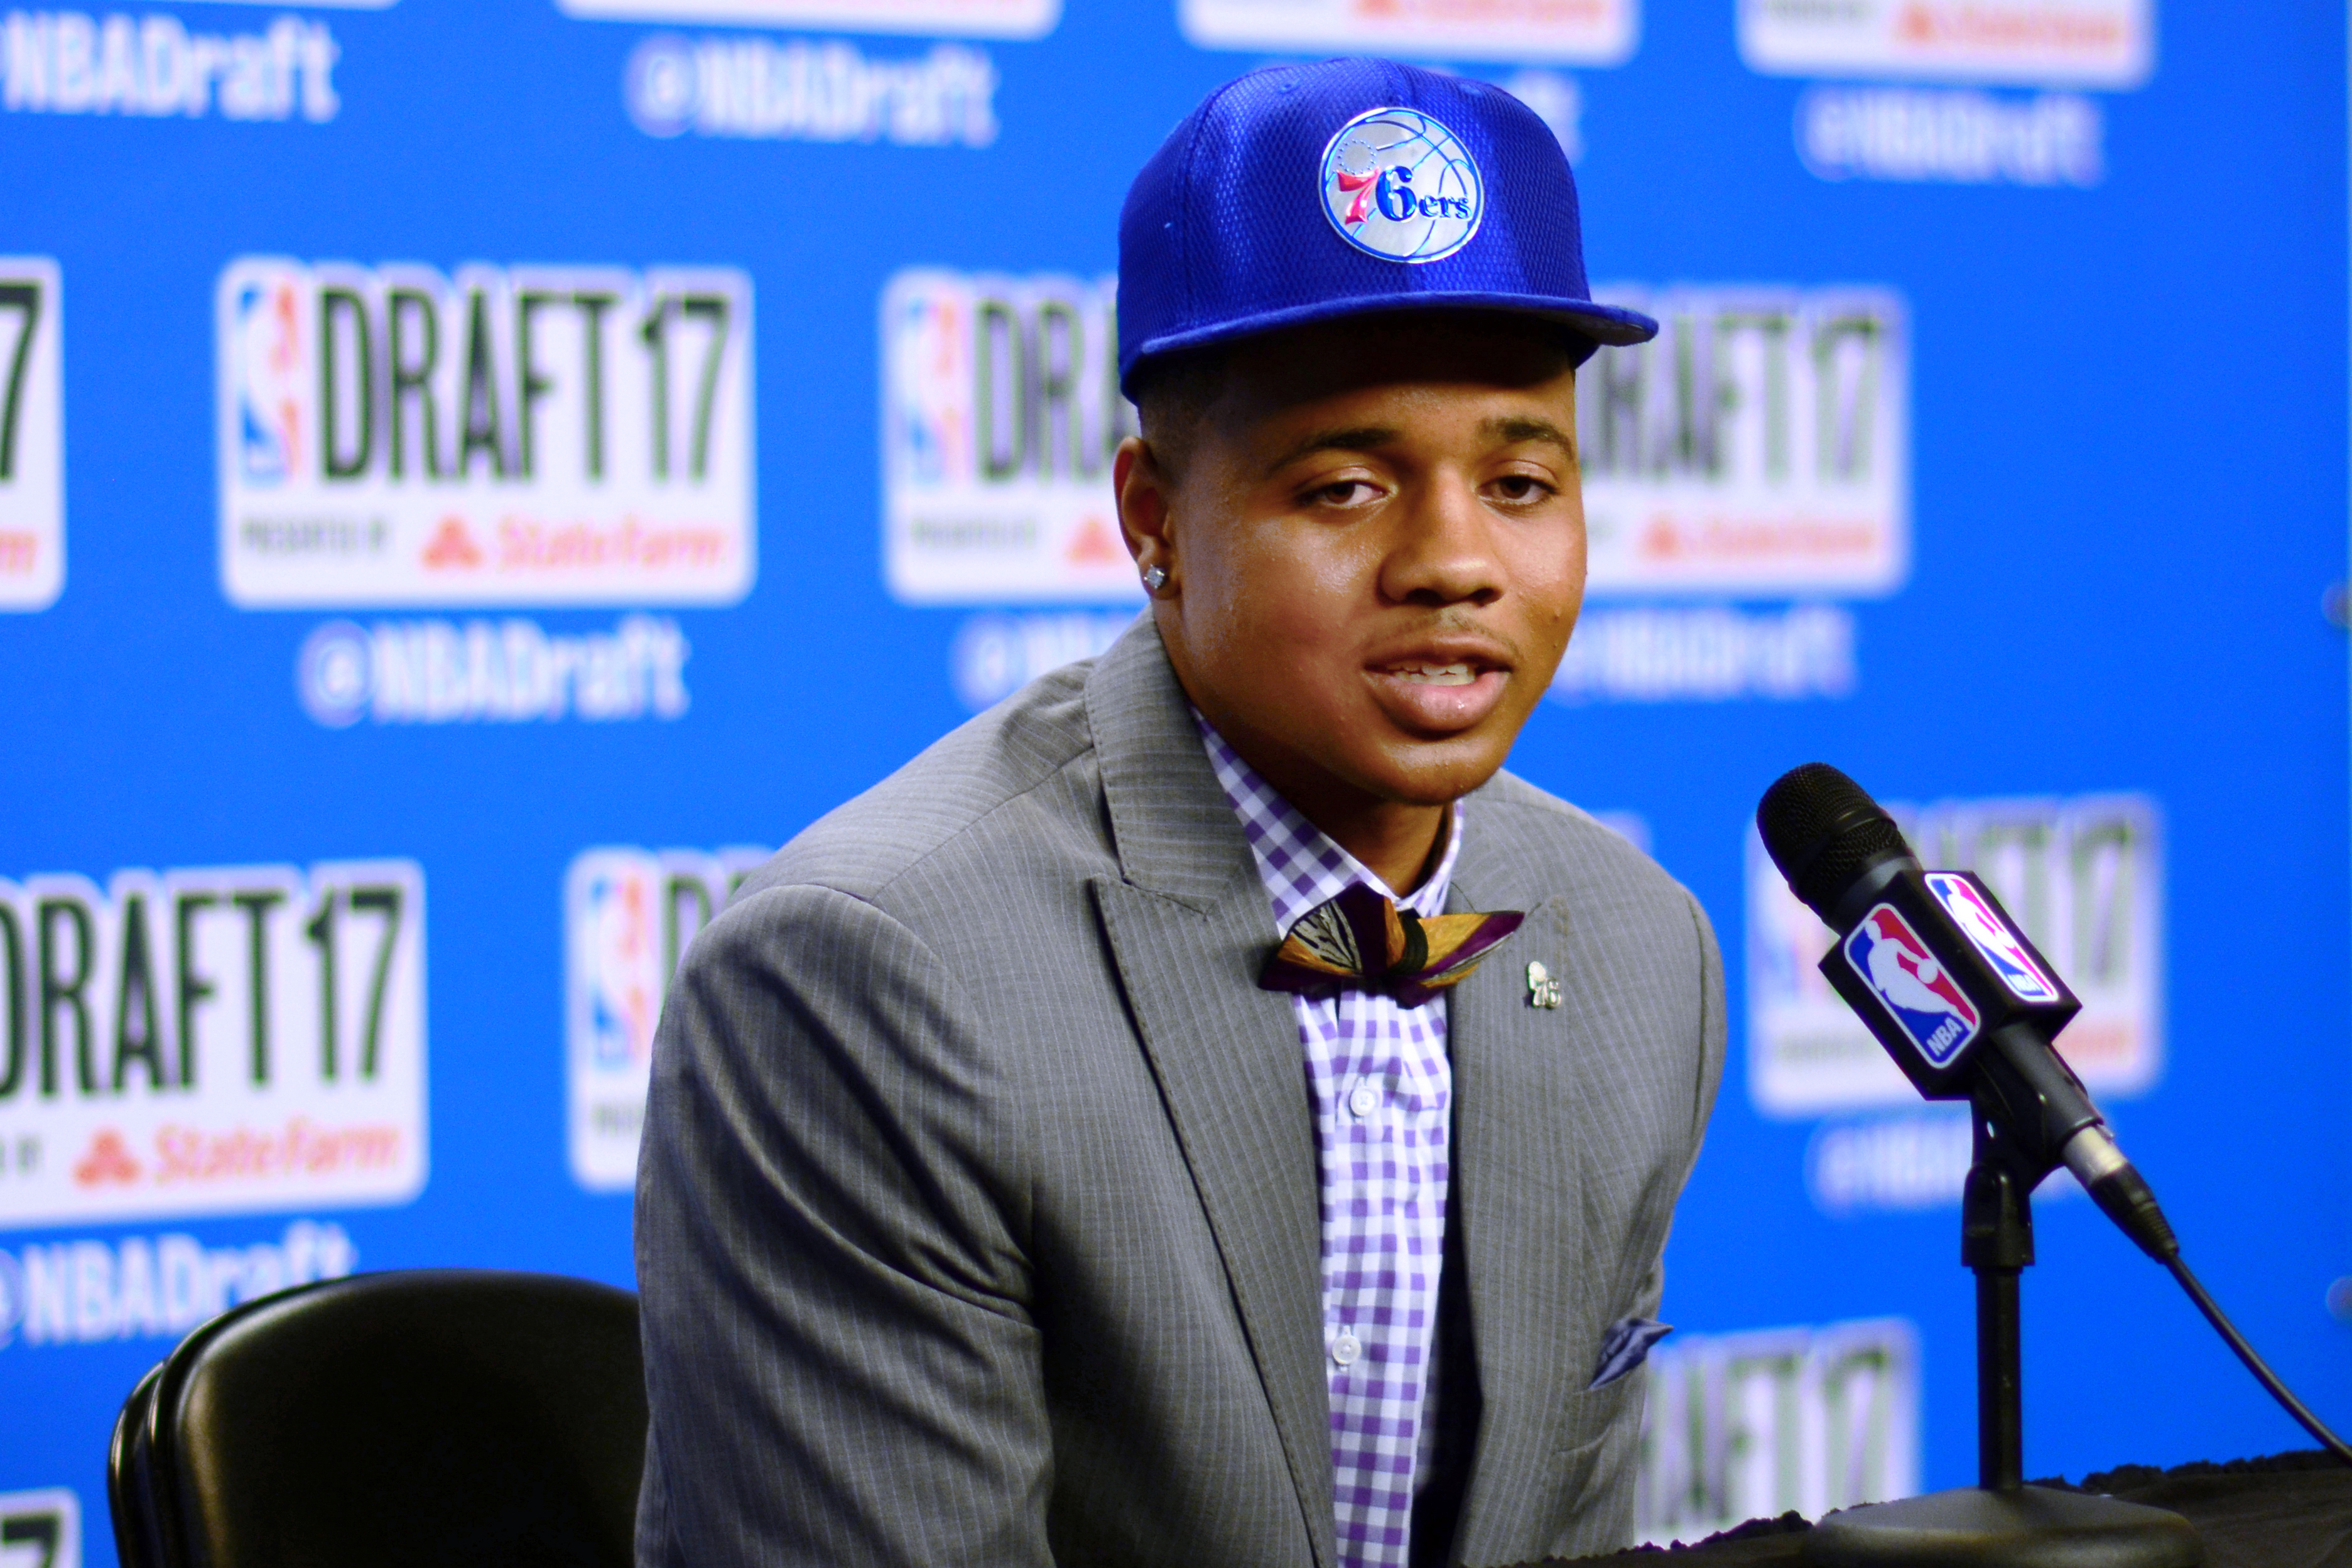 NBA Draft: Likely first overall pick Markelle Fultz excited about prospect  of playing for 76ers - Newsday